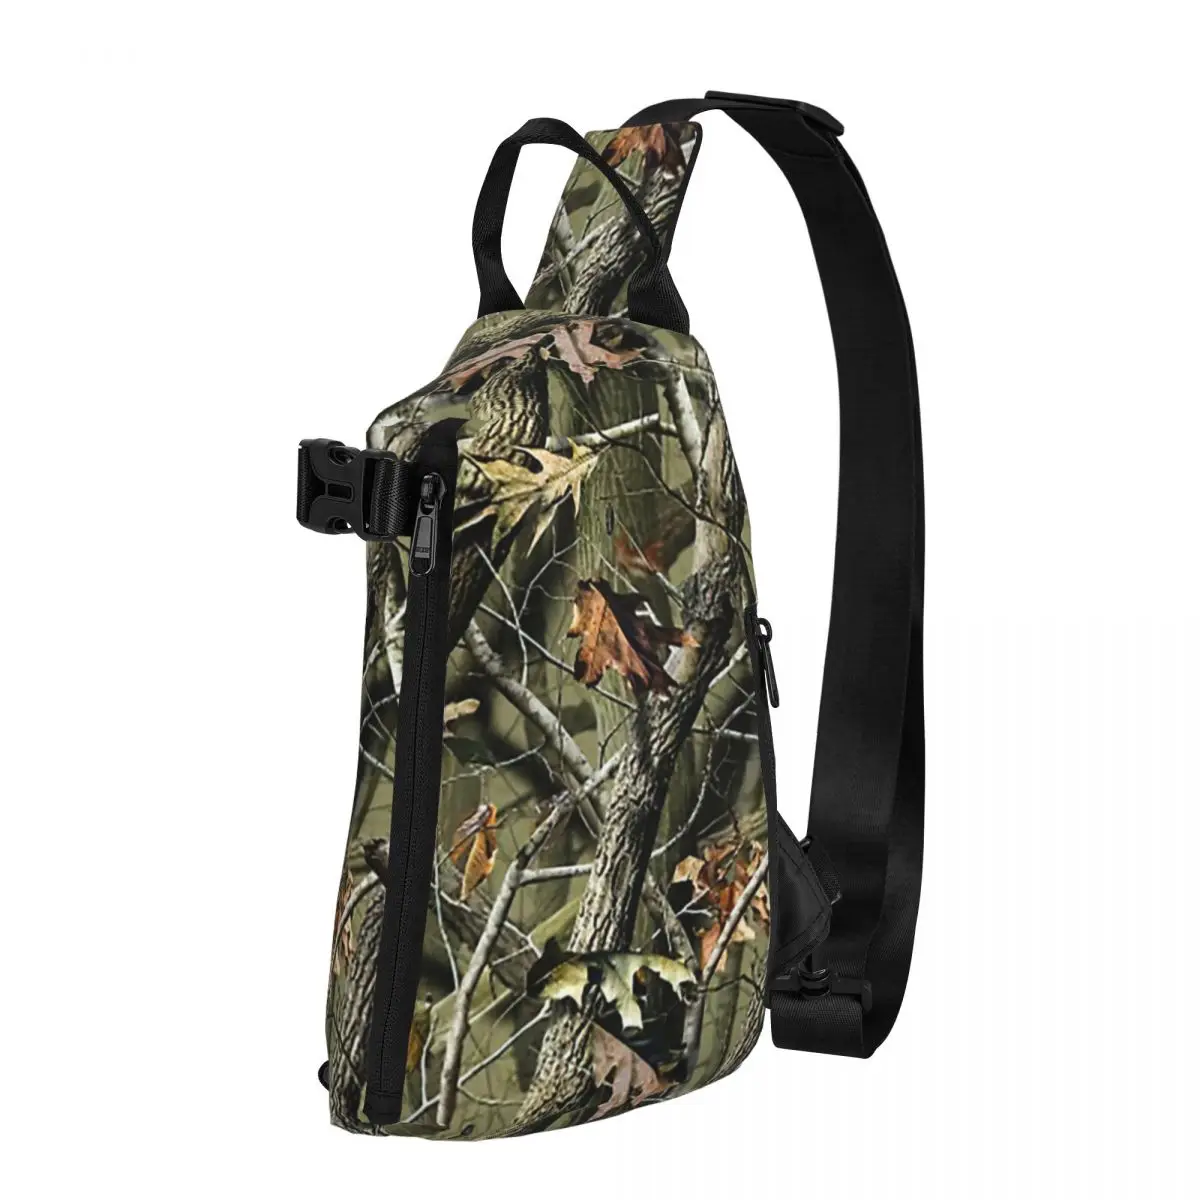 Hunting Military Camo Camouflage Woodland Reality Trees Shoulder Bags Chest Cross Chest Bag Diagonally Casual Man Messenger Bag